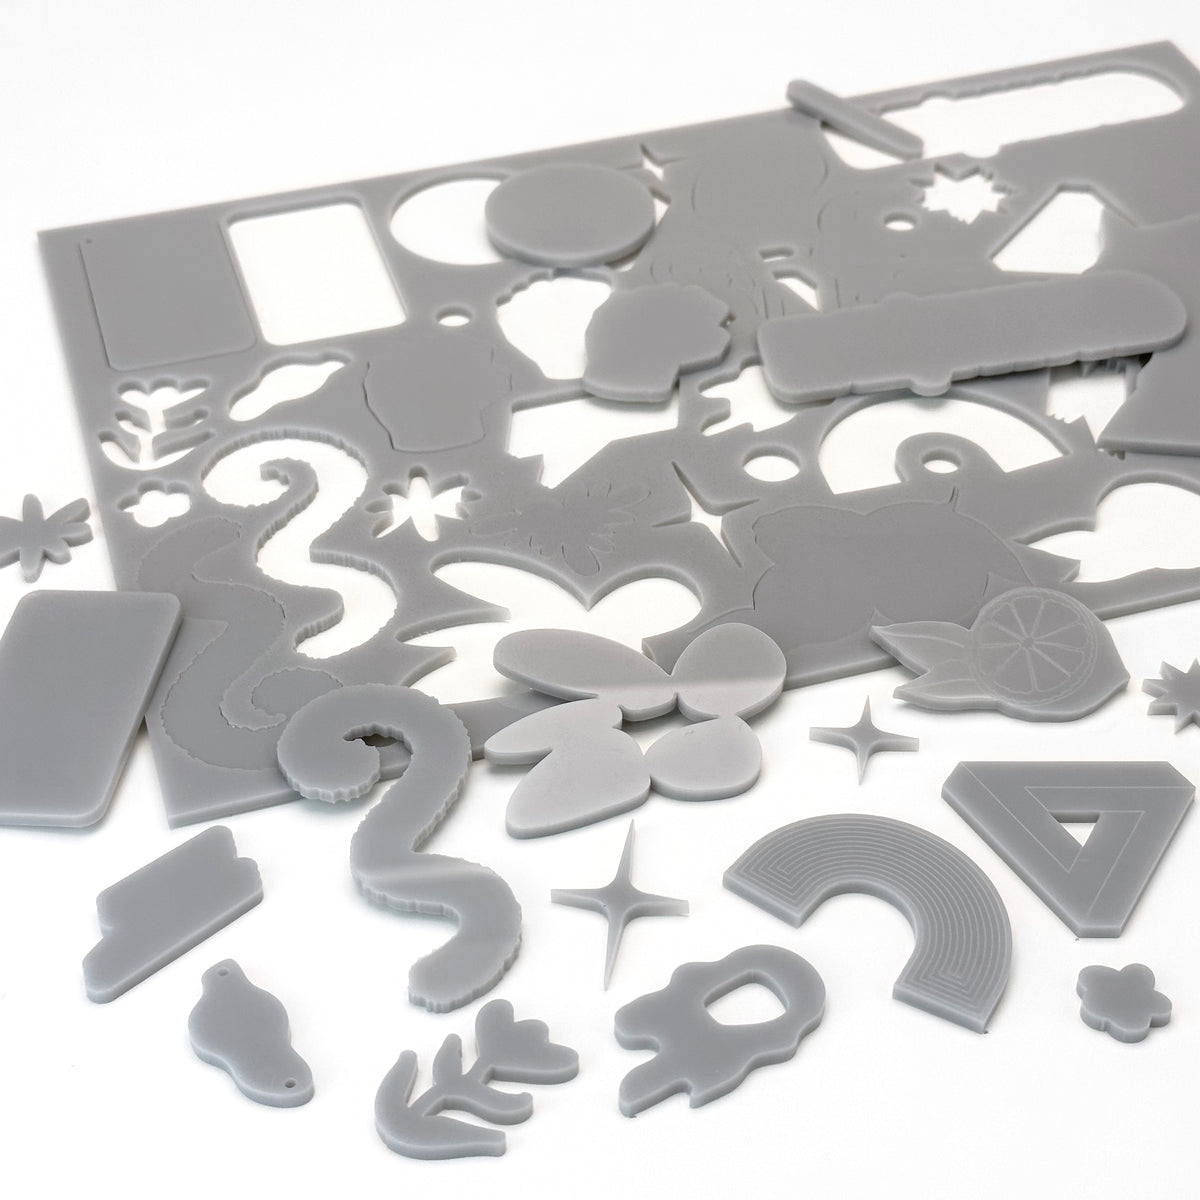 Grey Acrylic with laser cutting only - 300x200mm